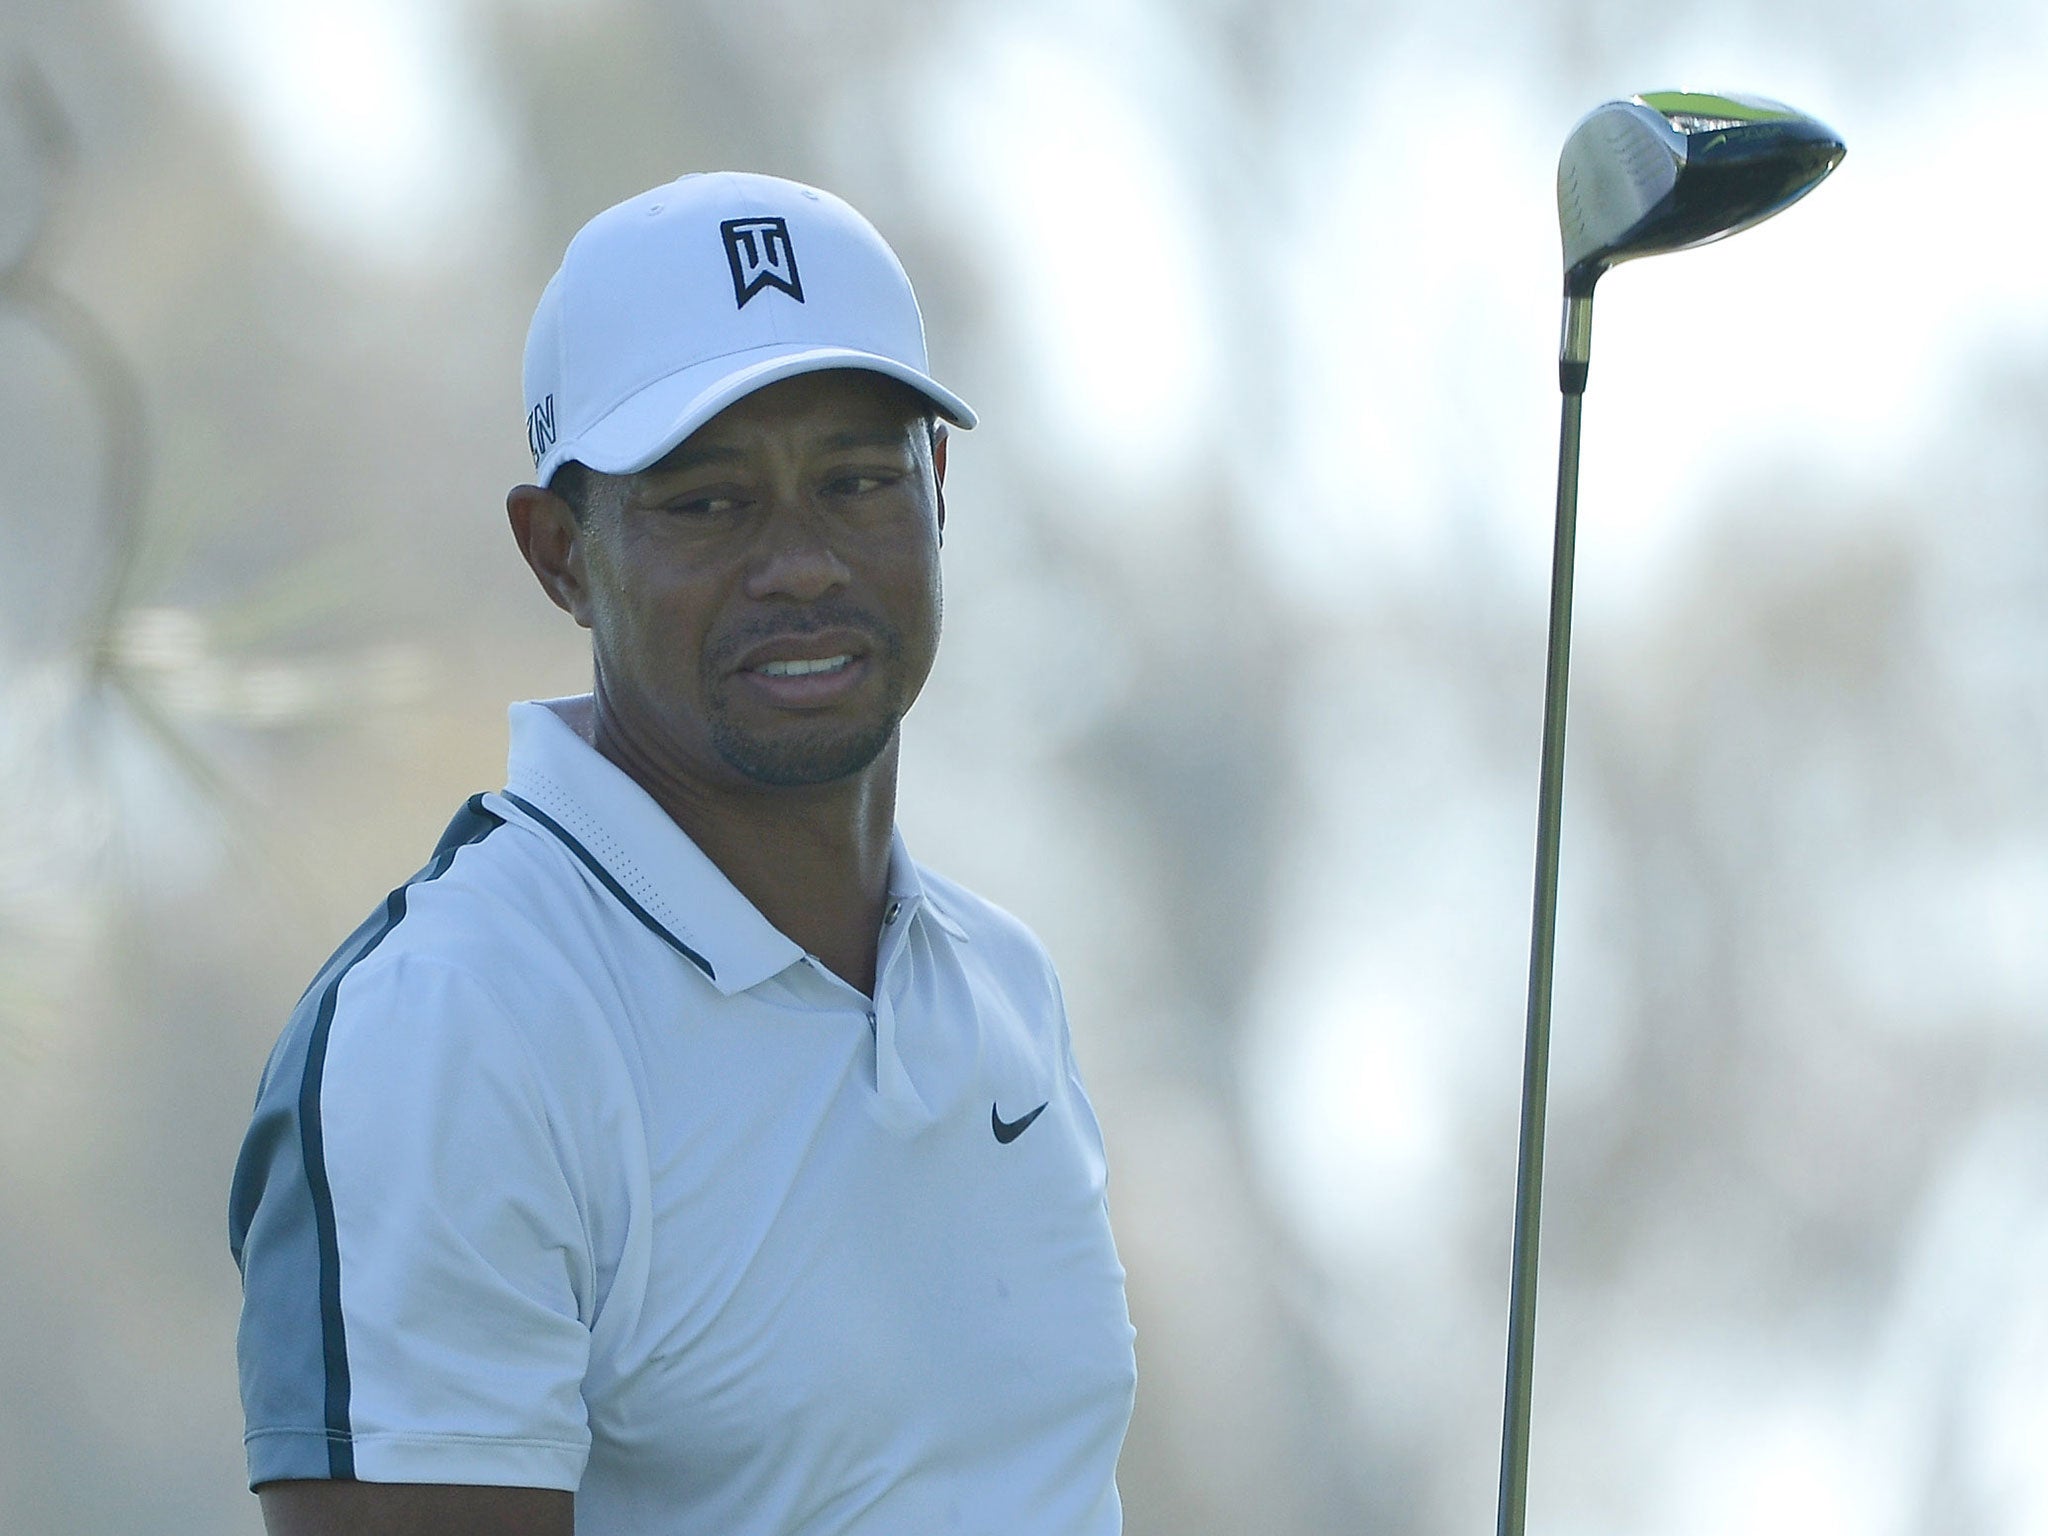 Woods has struggled to regain his form after multiple injuries and surgery